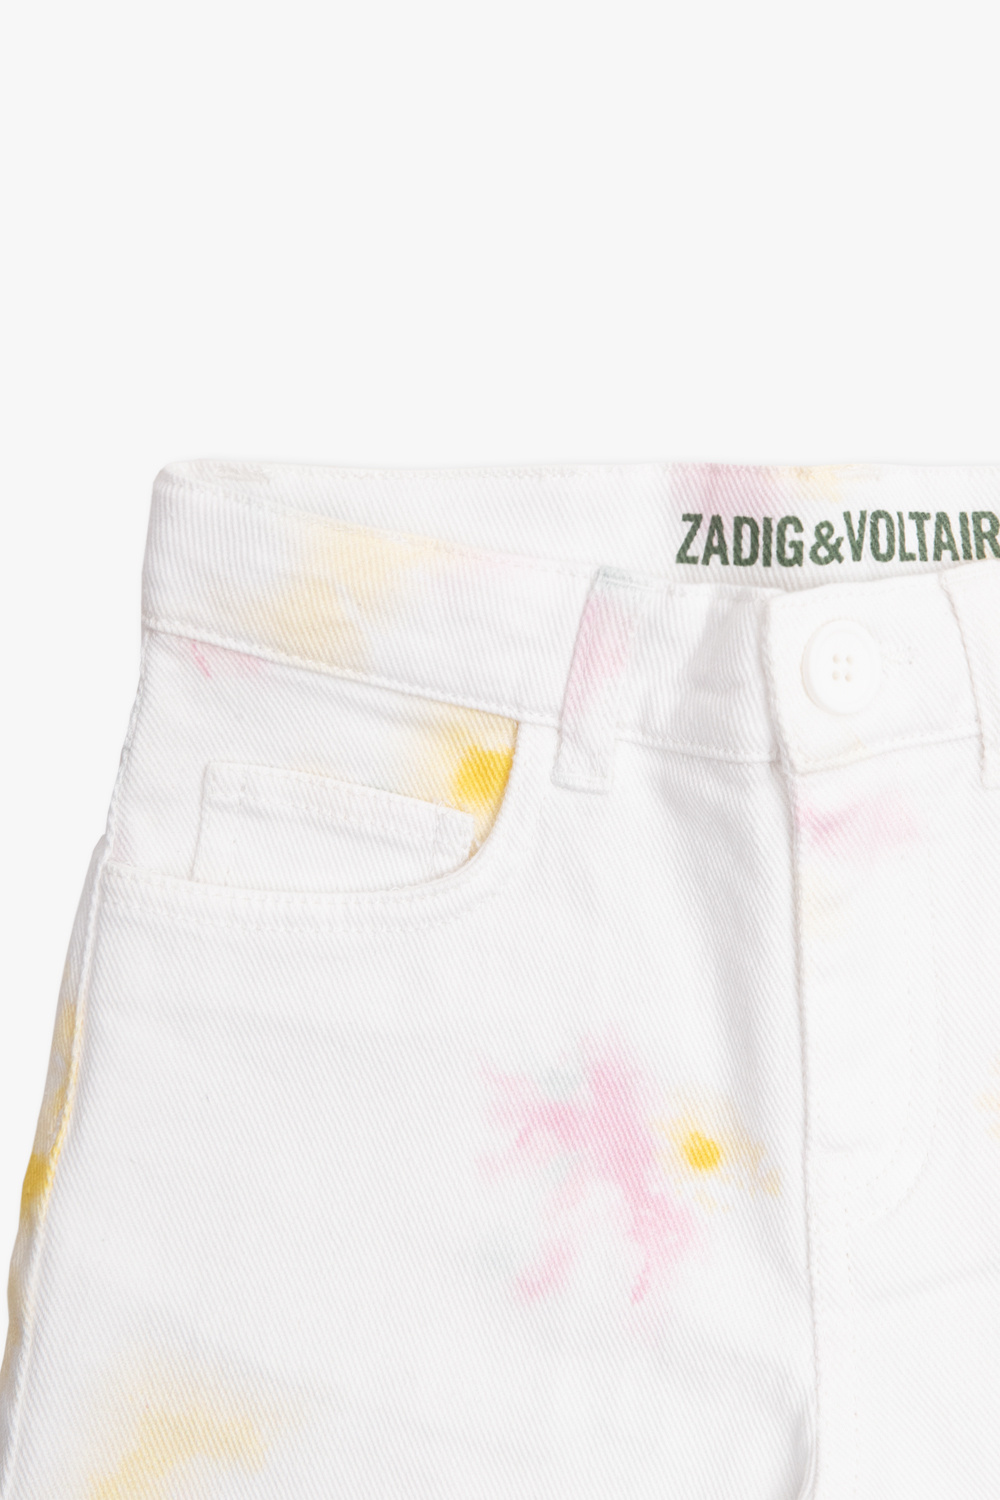 Zadig & Voltaire Kids Printed shorts